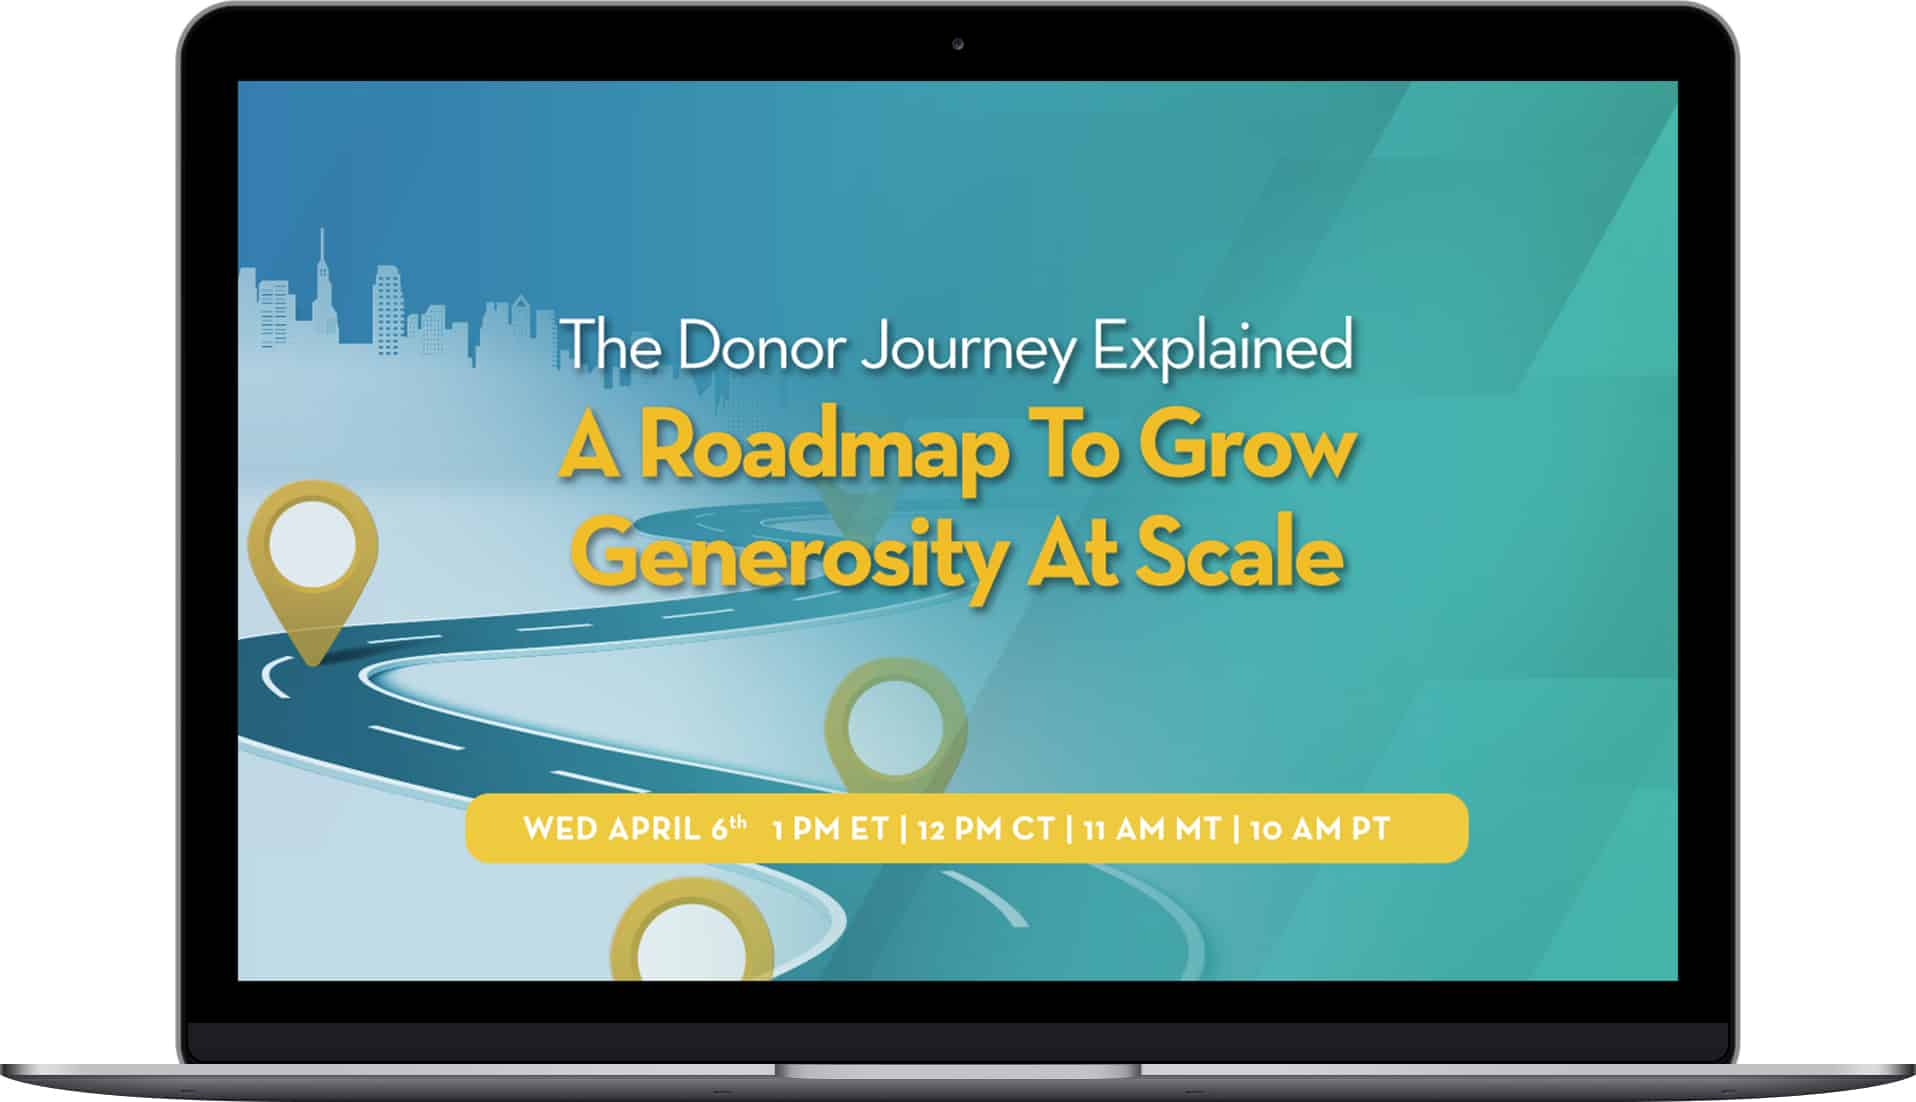 The Donor Journey Explained laptop